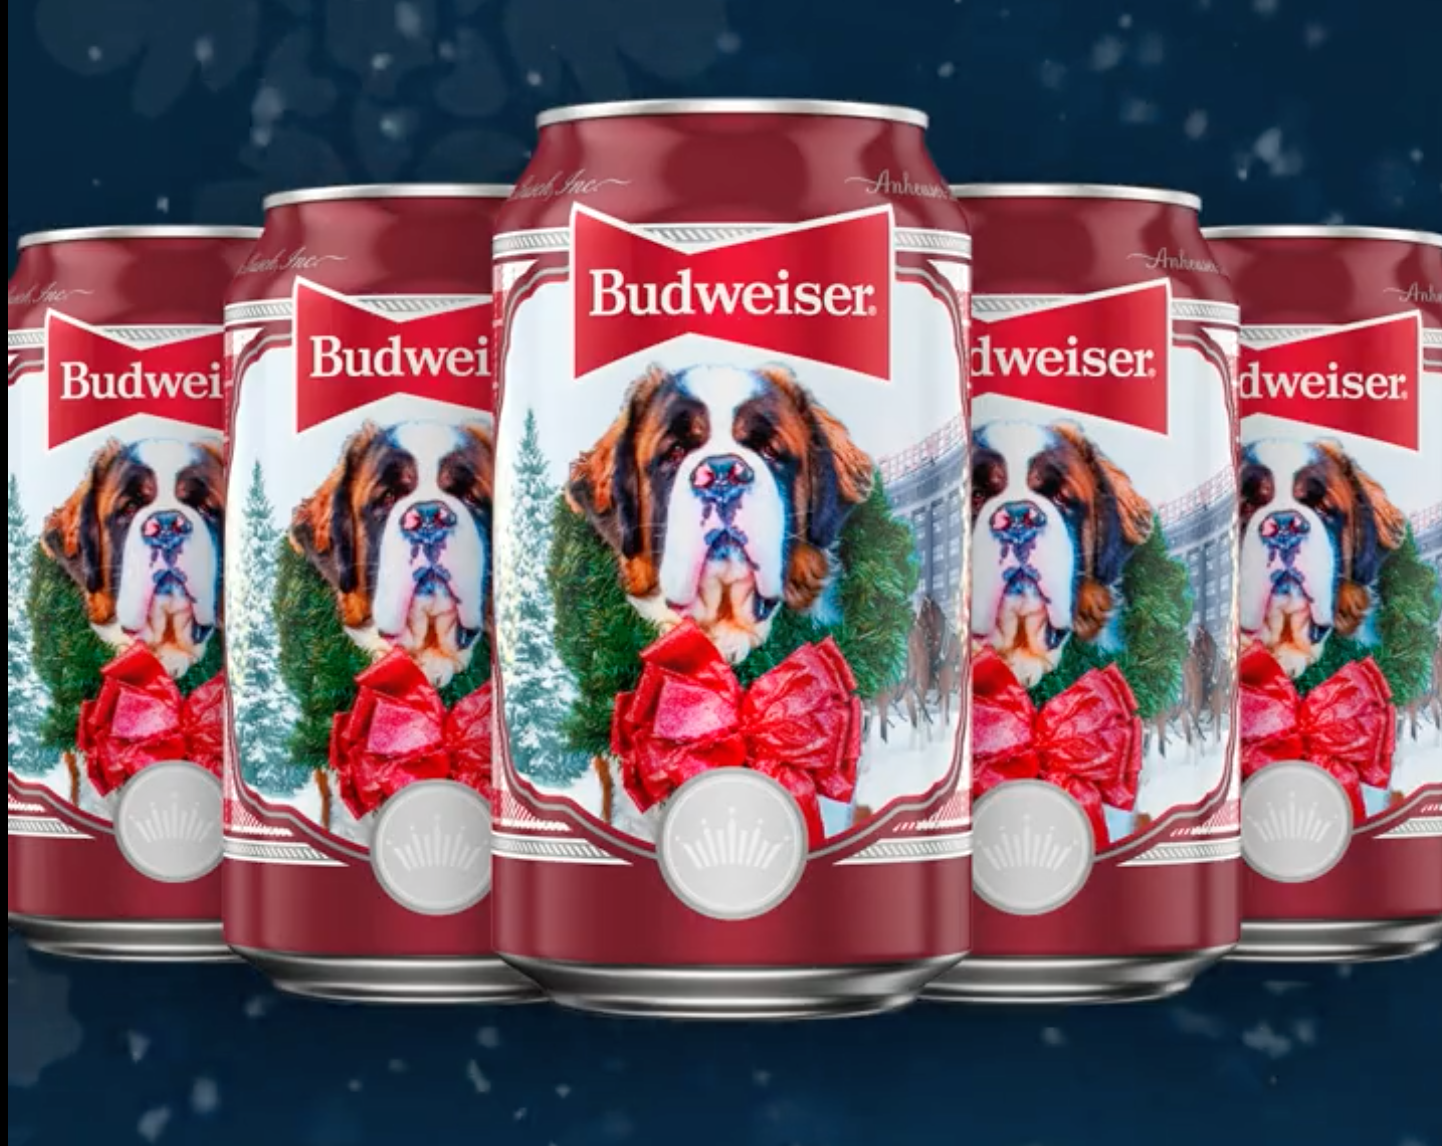 Budweiser's holiday cans featuring dogs